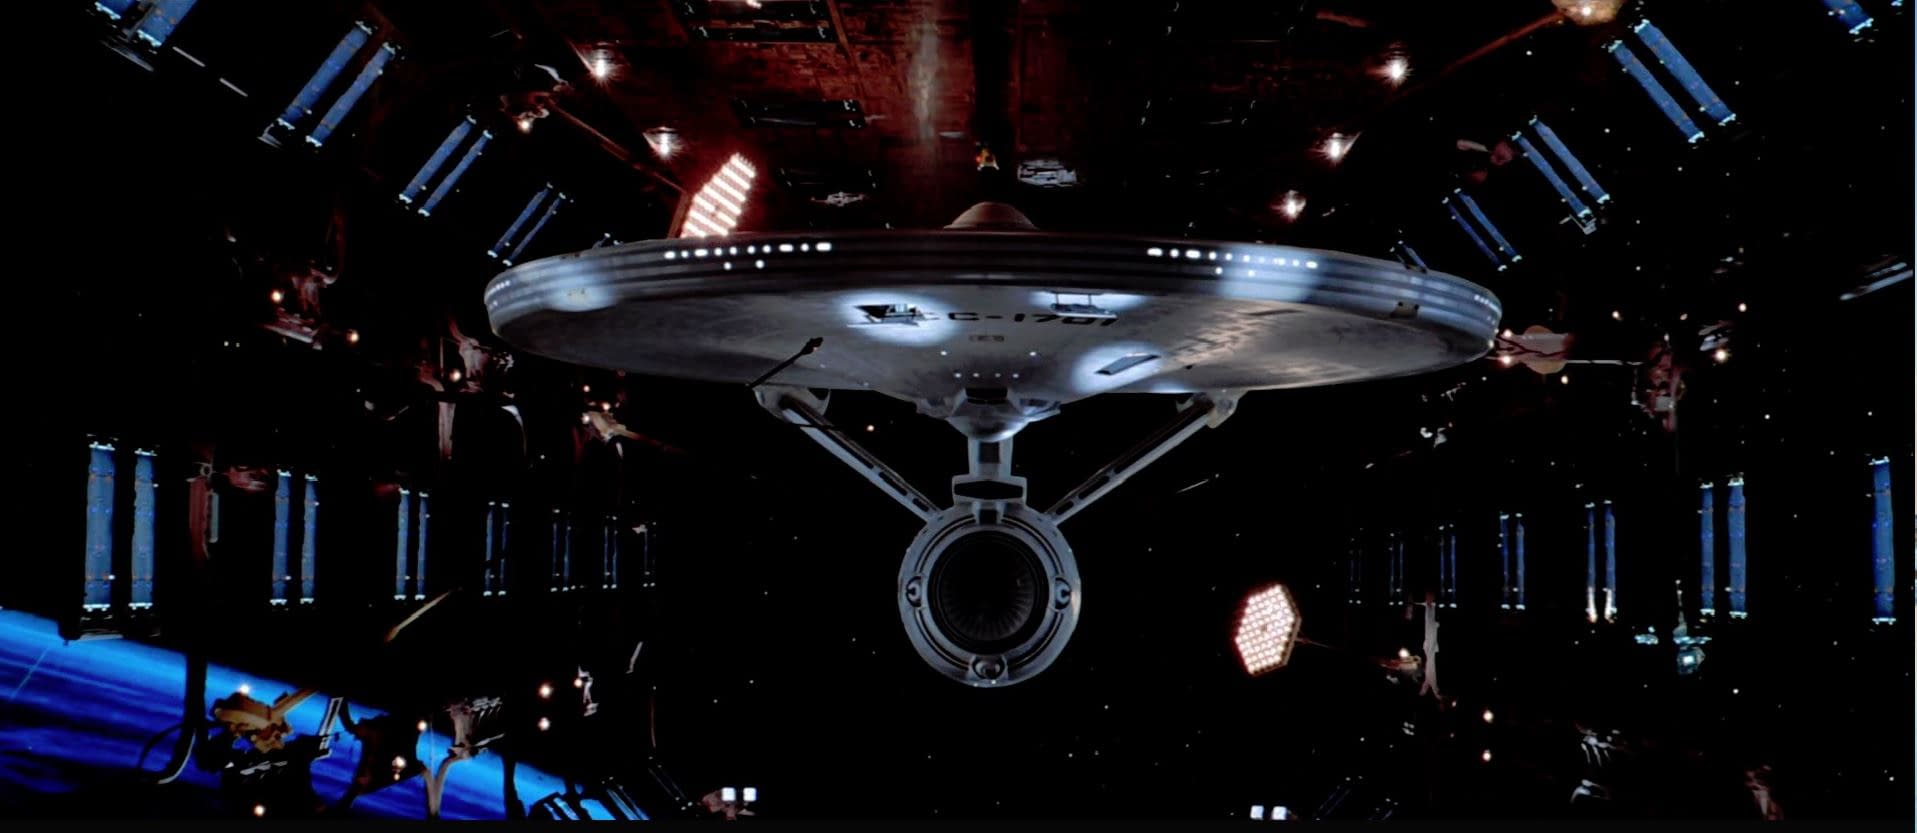 Star Trek: The Motion Picture: Director's Edition Trailer in 4K Glory